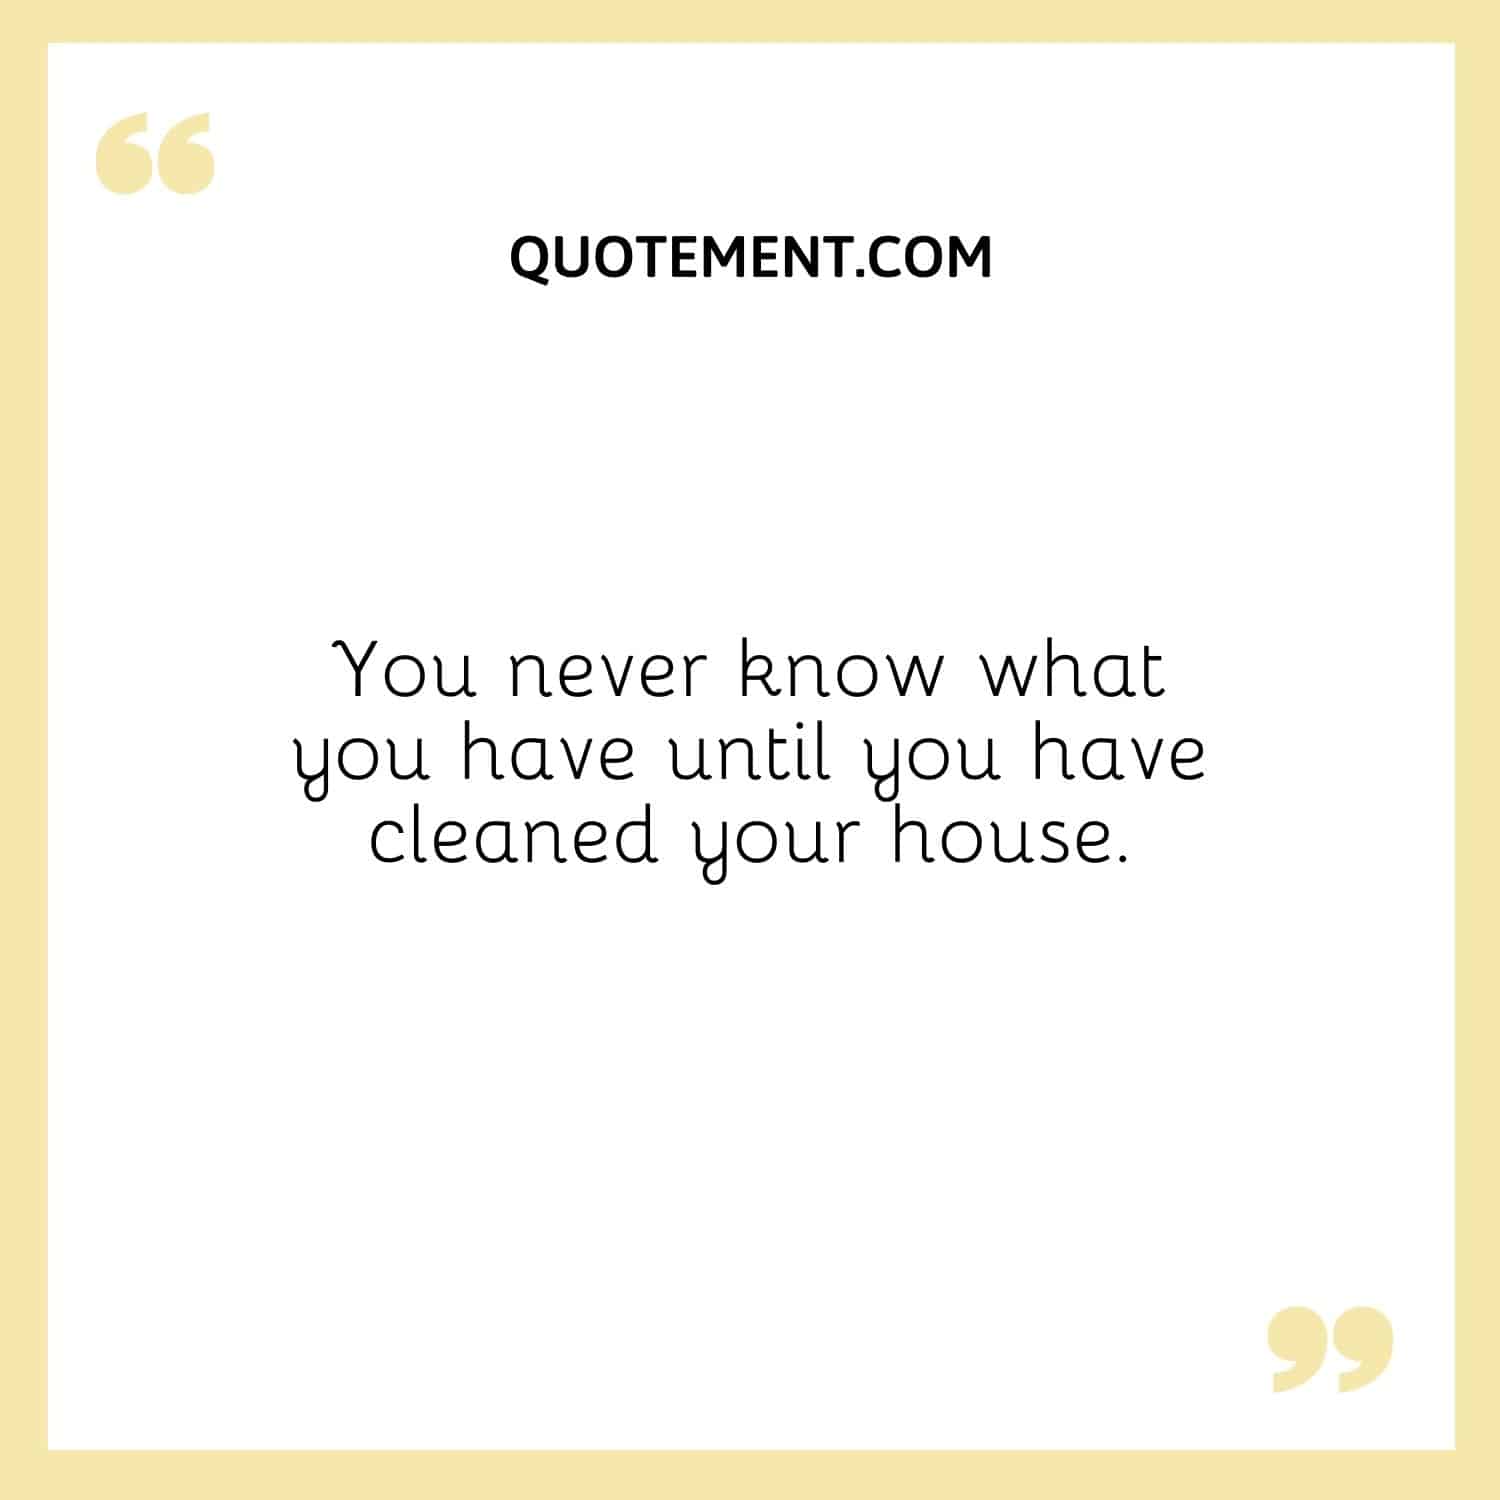 You never know what you have until you have cleaned your house.